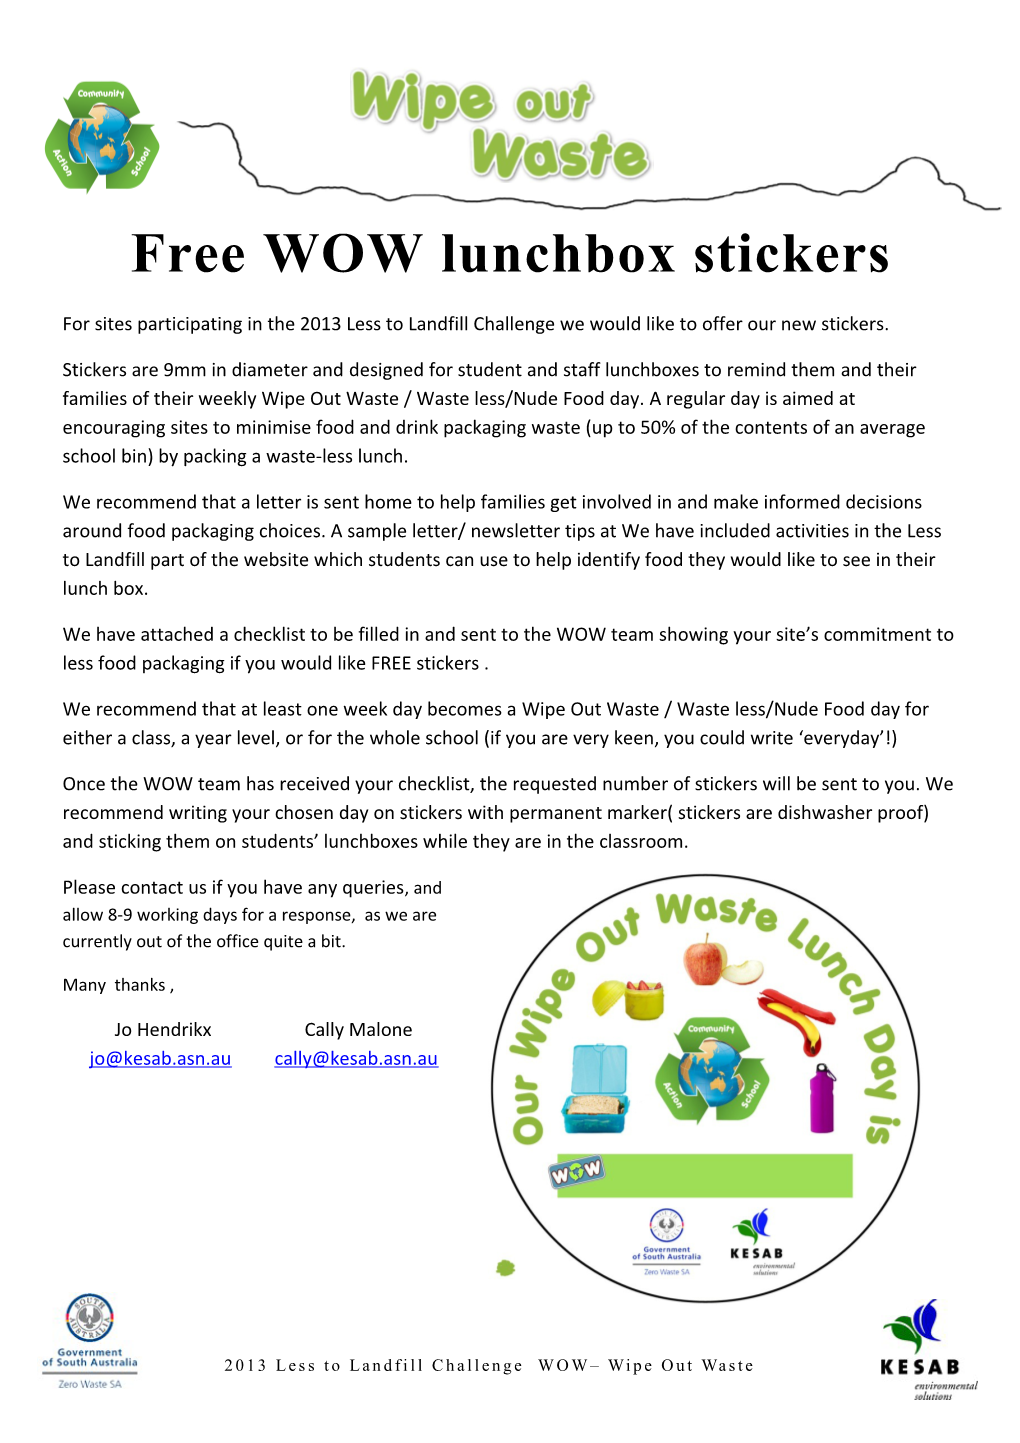 Free WOW Lunchbox Stickers